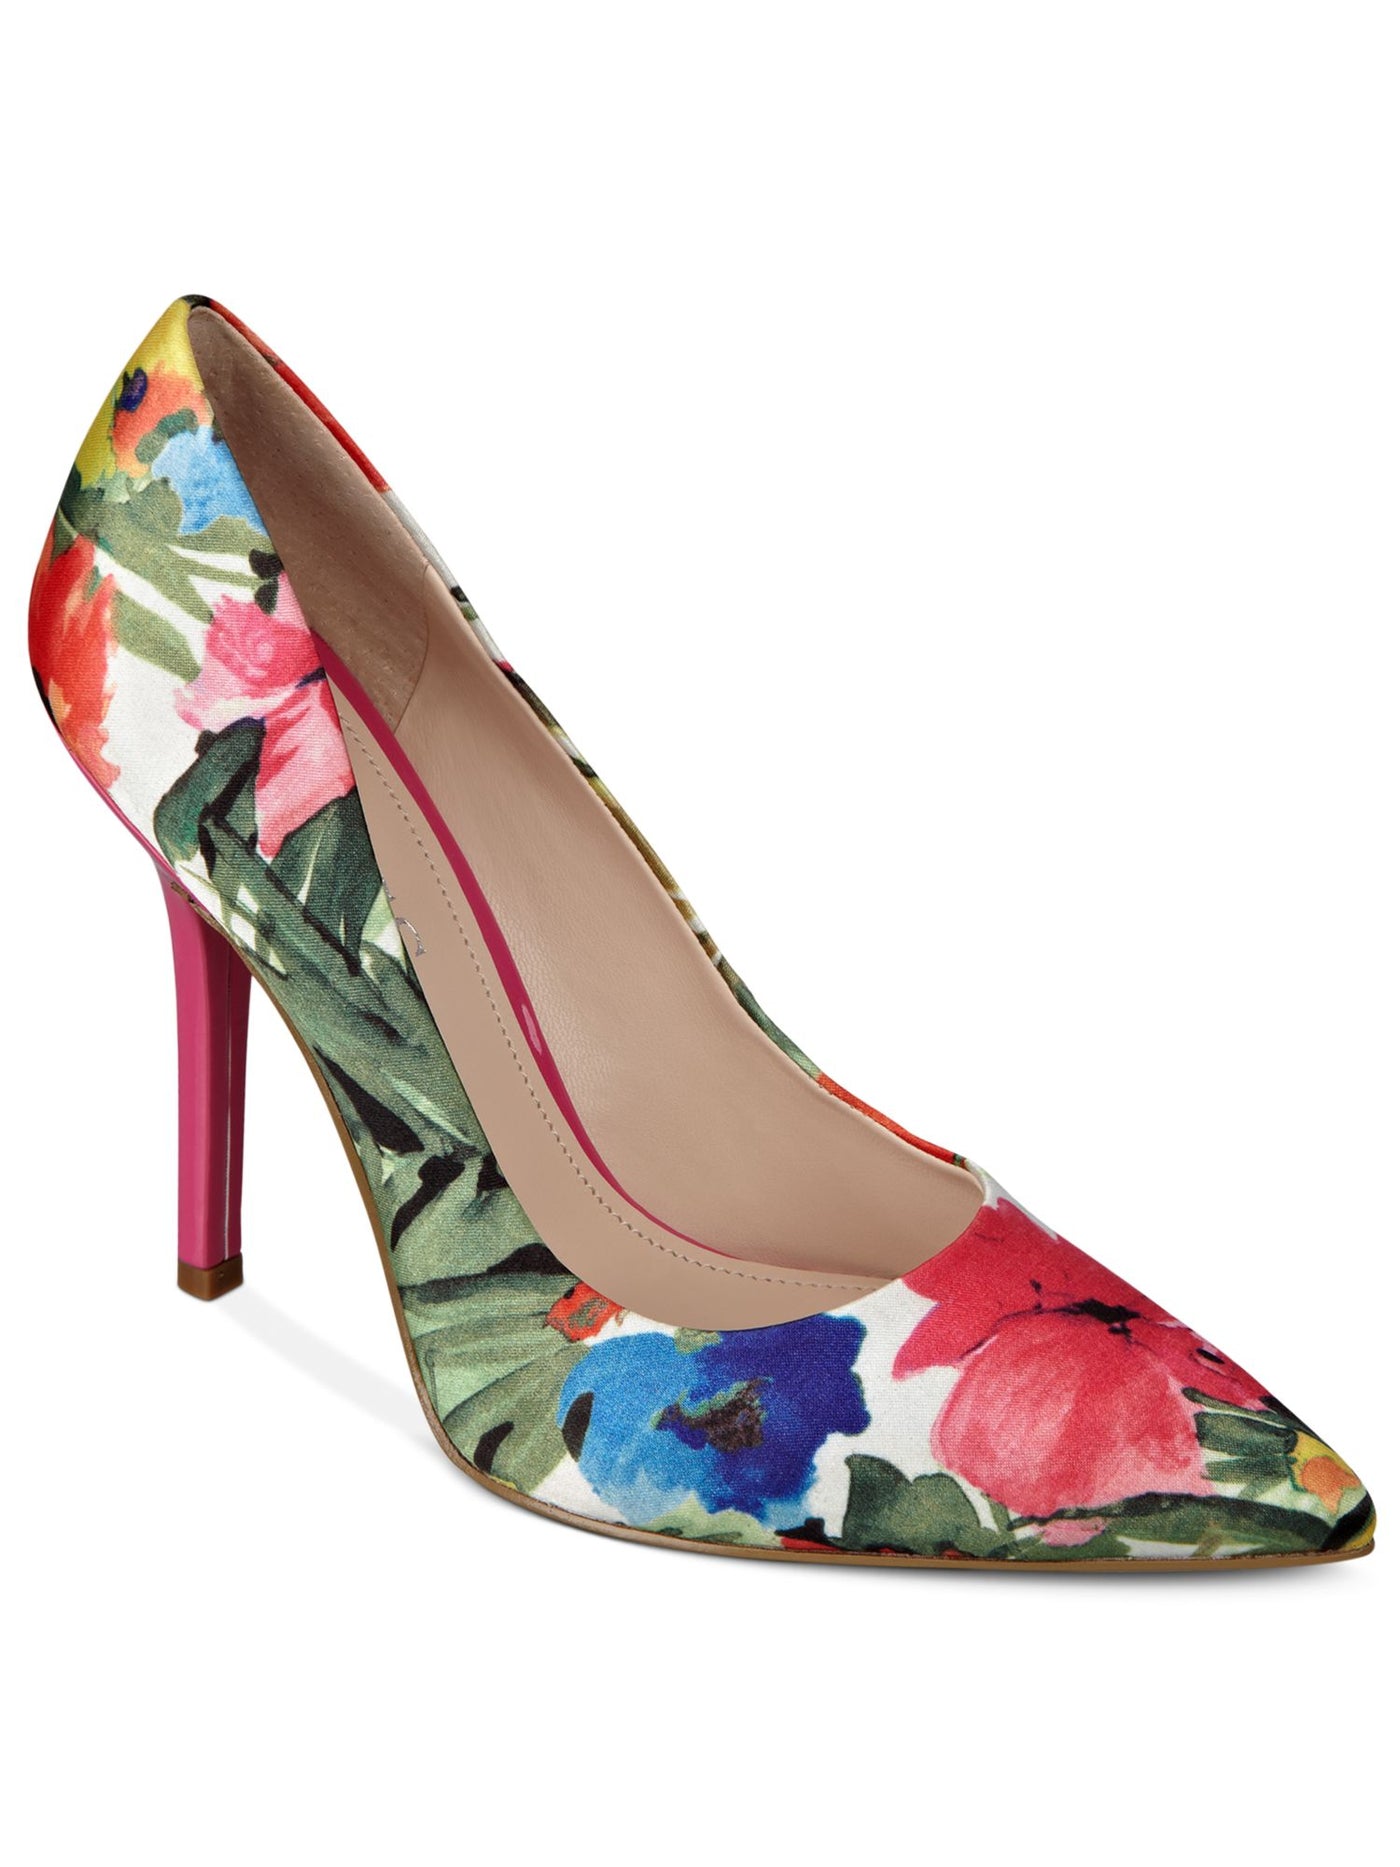 GUESS Womens Green Floral Padded Neodan Pointed Toe Stiletto Slip On Dress Pumps 5.5 M